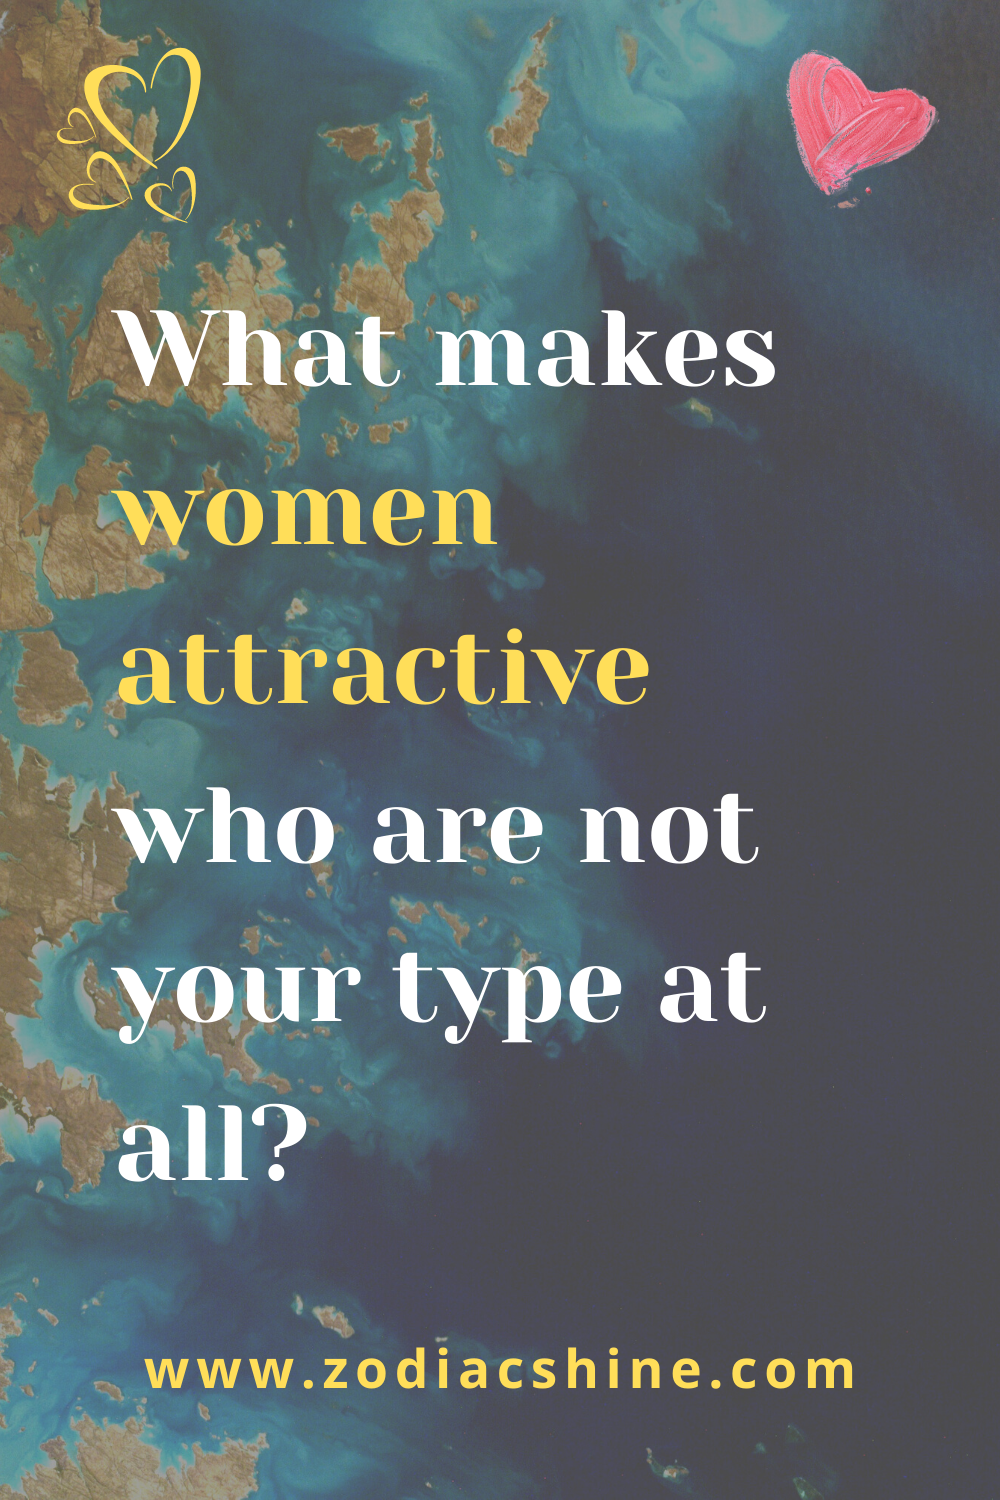 What makes women attractive who are not your type at all?